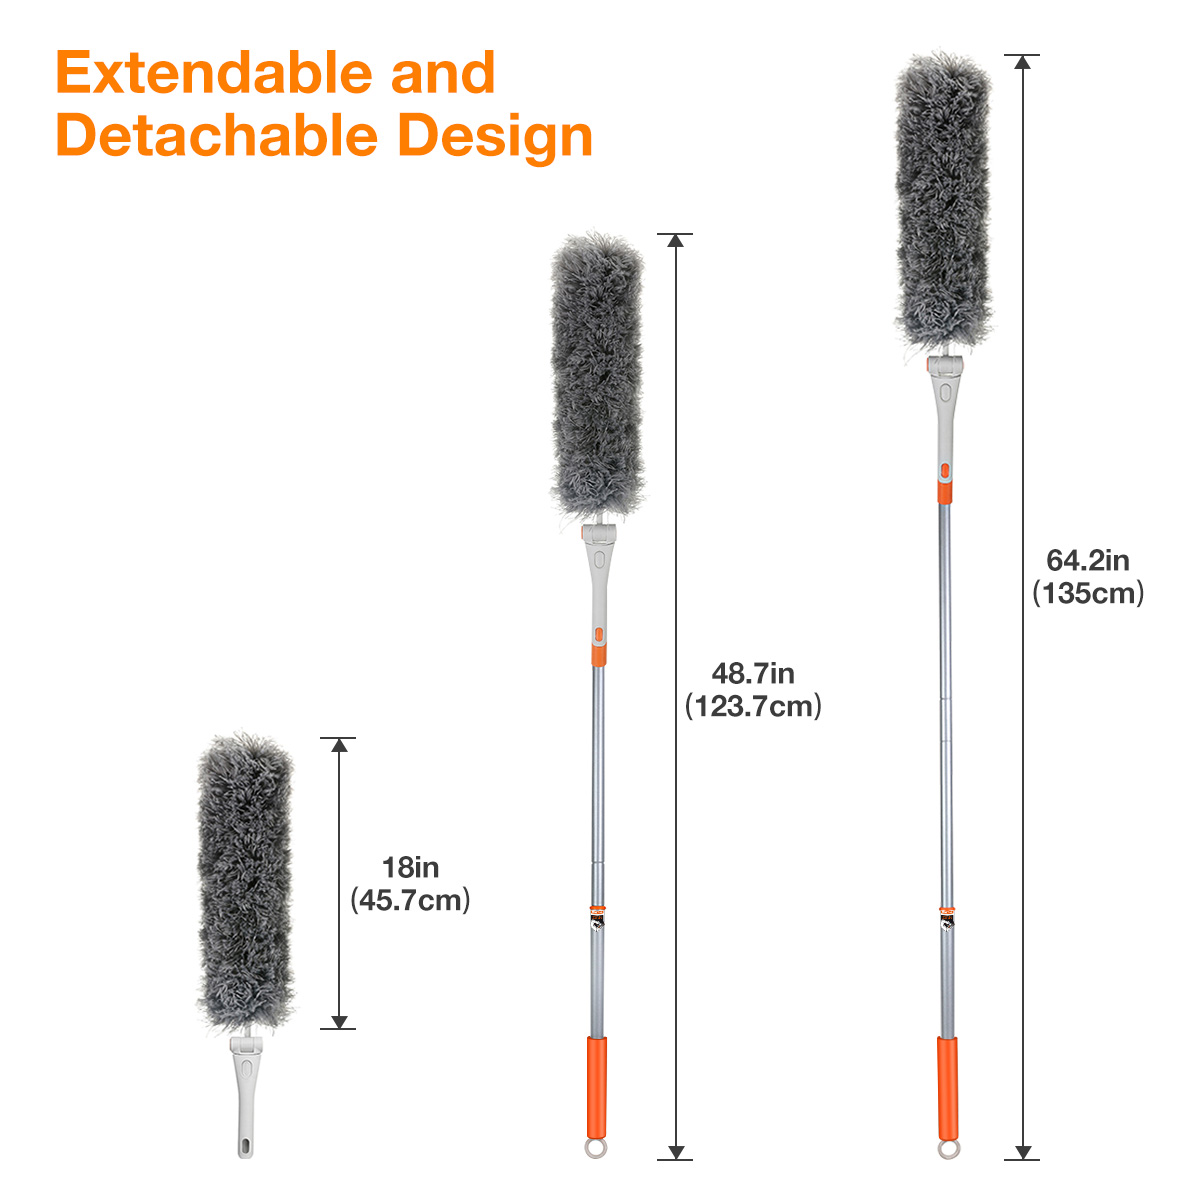 MATCC-Microfiber-Feather-Dusters-with-270deg-Rotation-Head-Extension-Pole-for-Cleaning-Tool-1878218-3